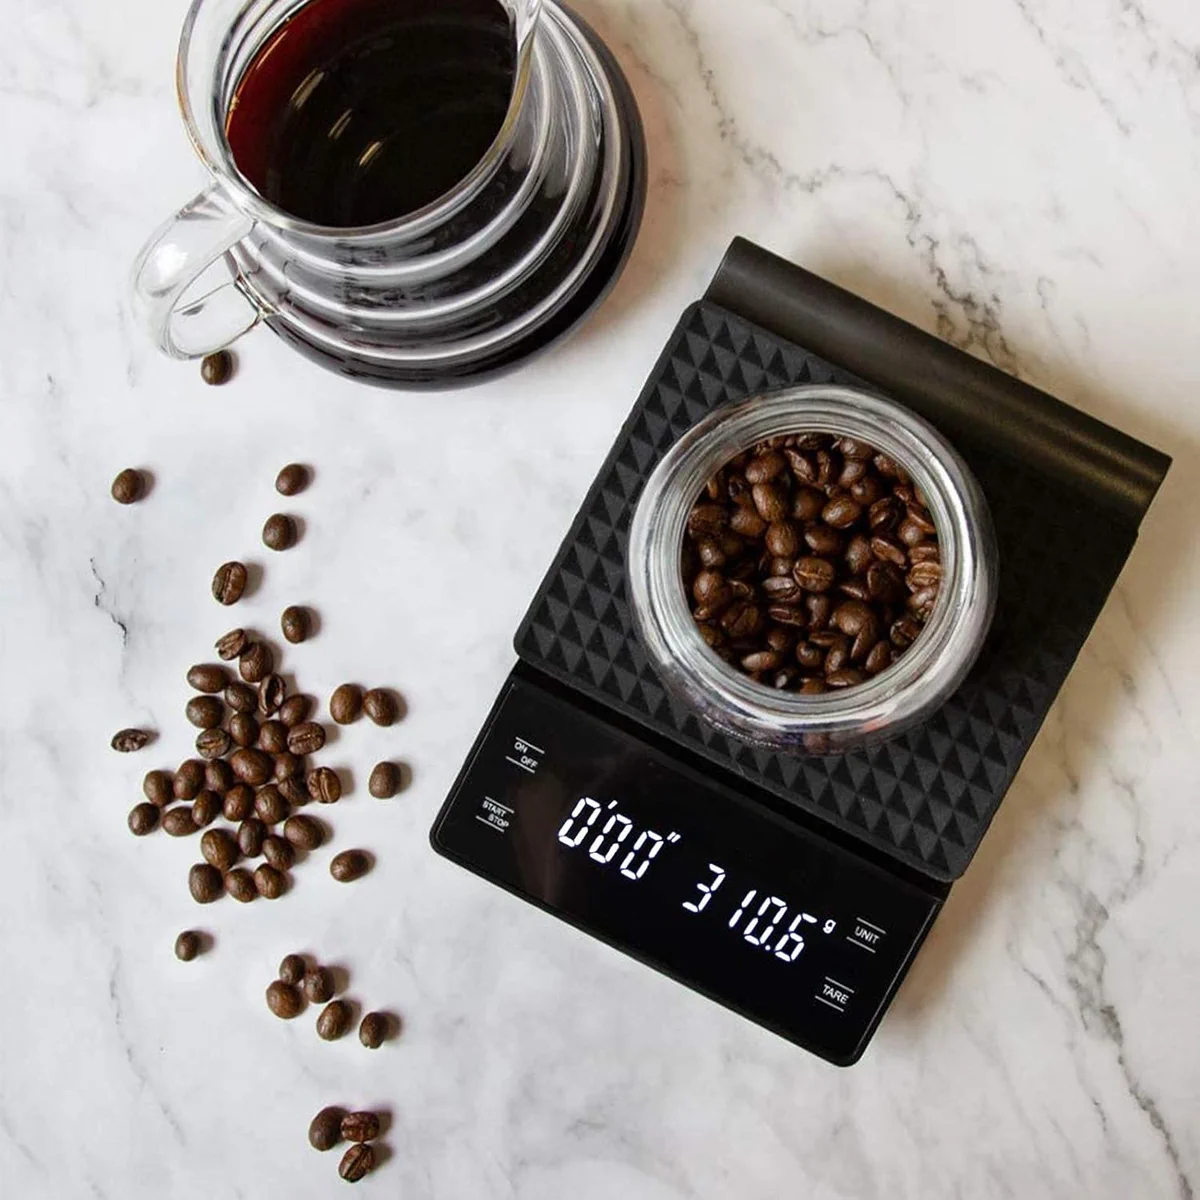 EXTRALINK HOME COFFEE SCALE LCD DISPLAY C1